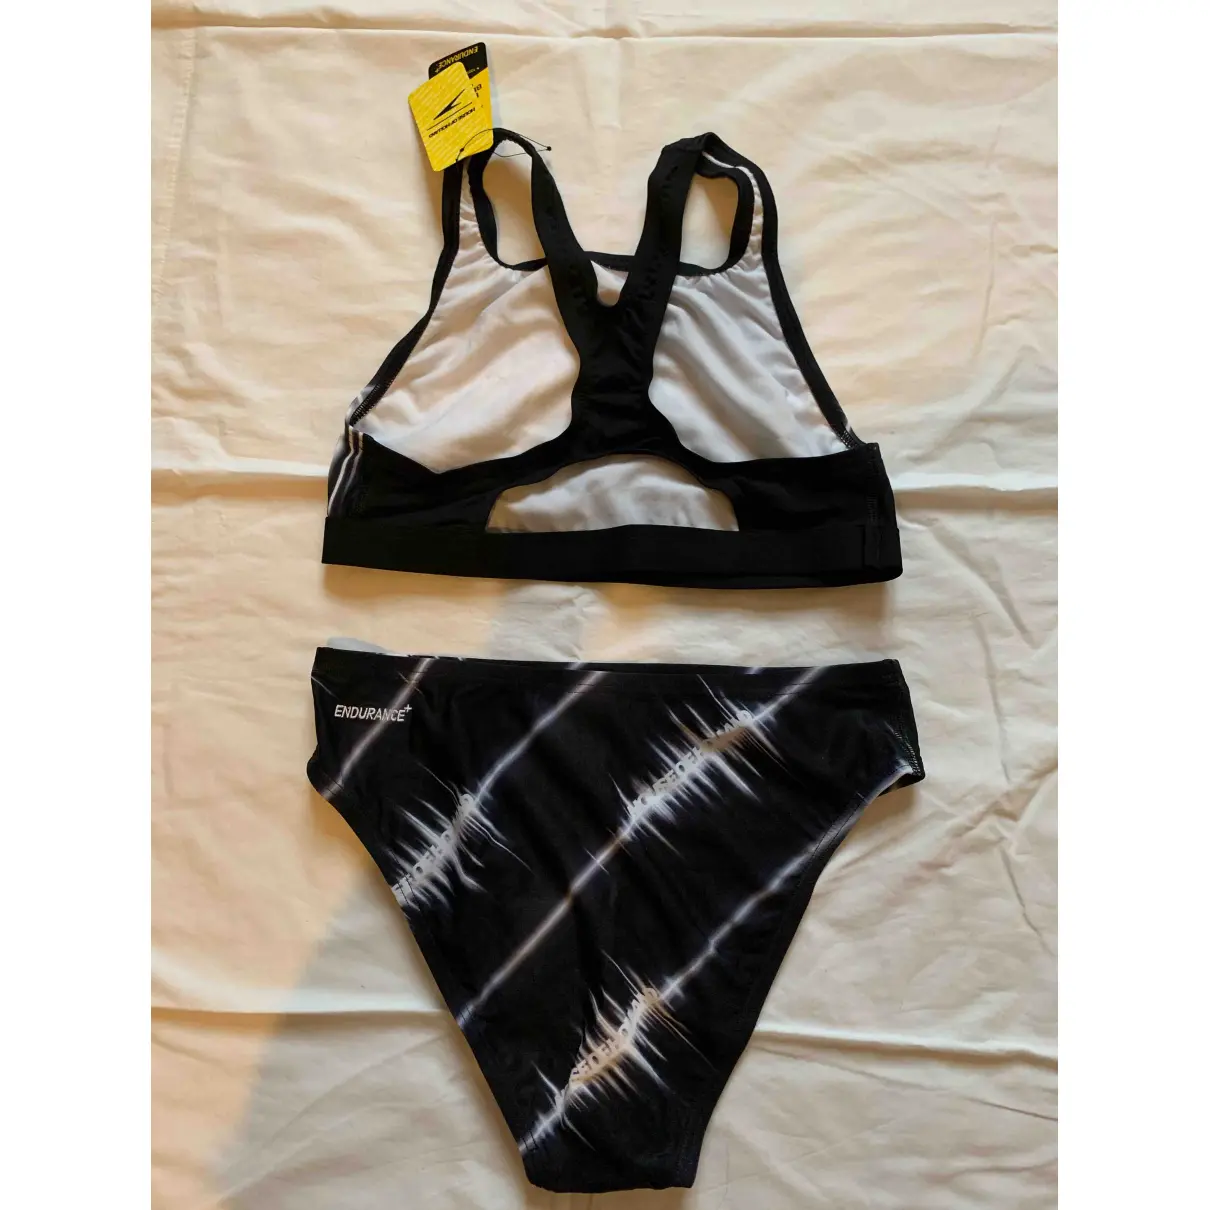 Buy House Of Holland Two-piece swimsuit online